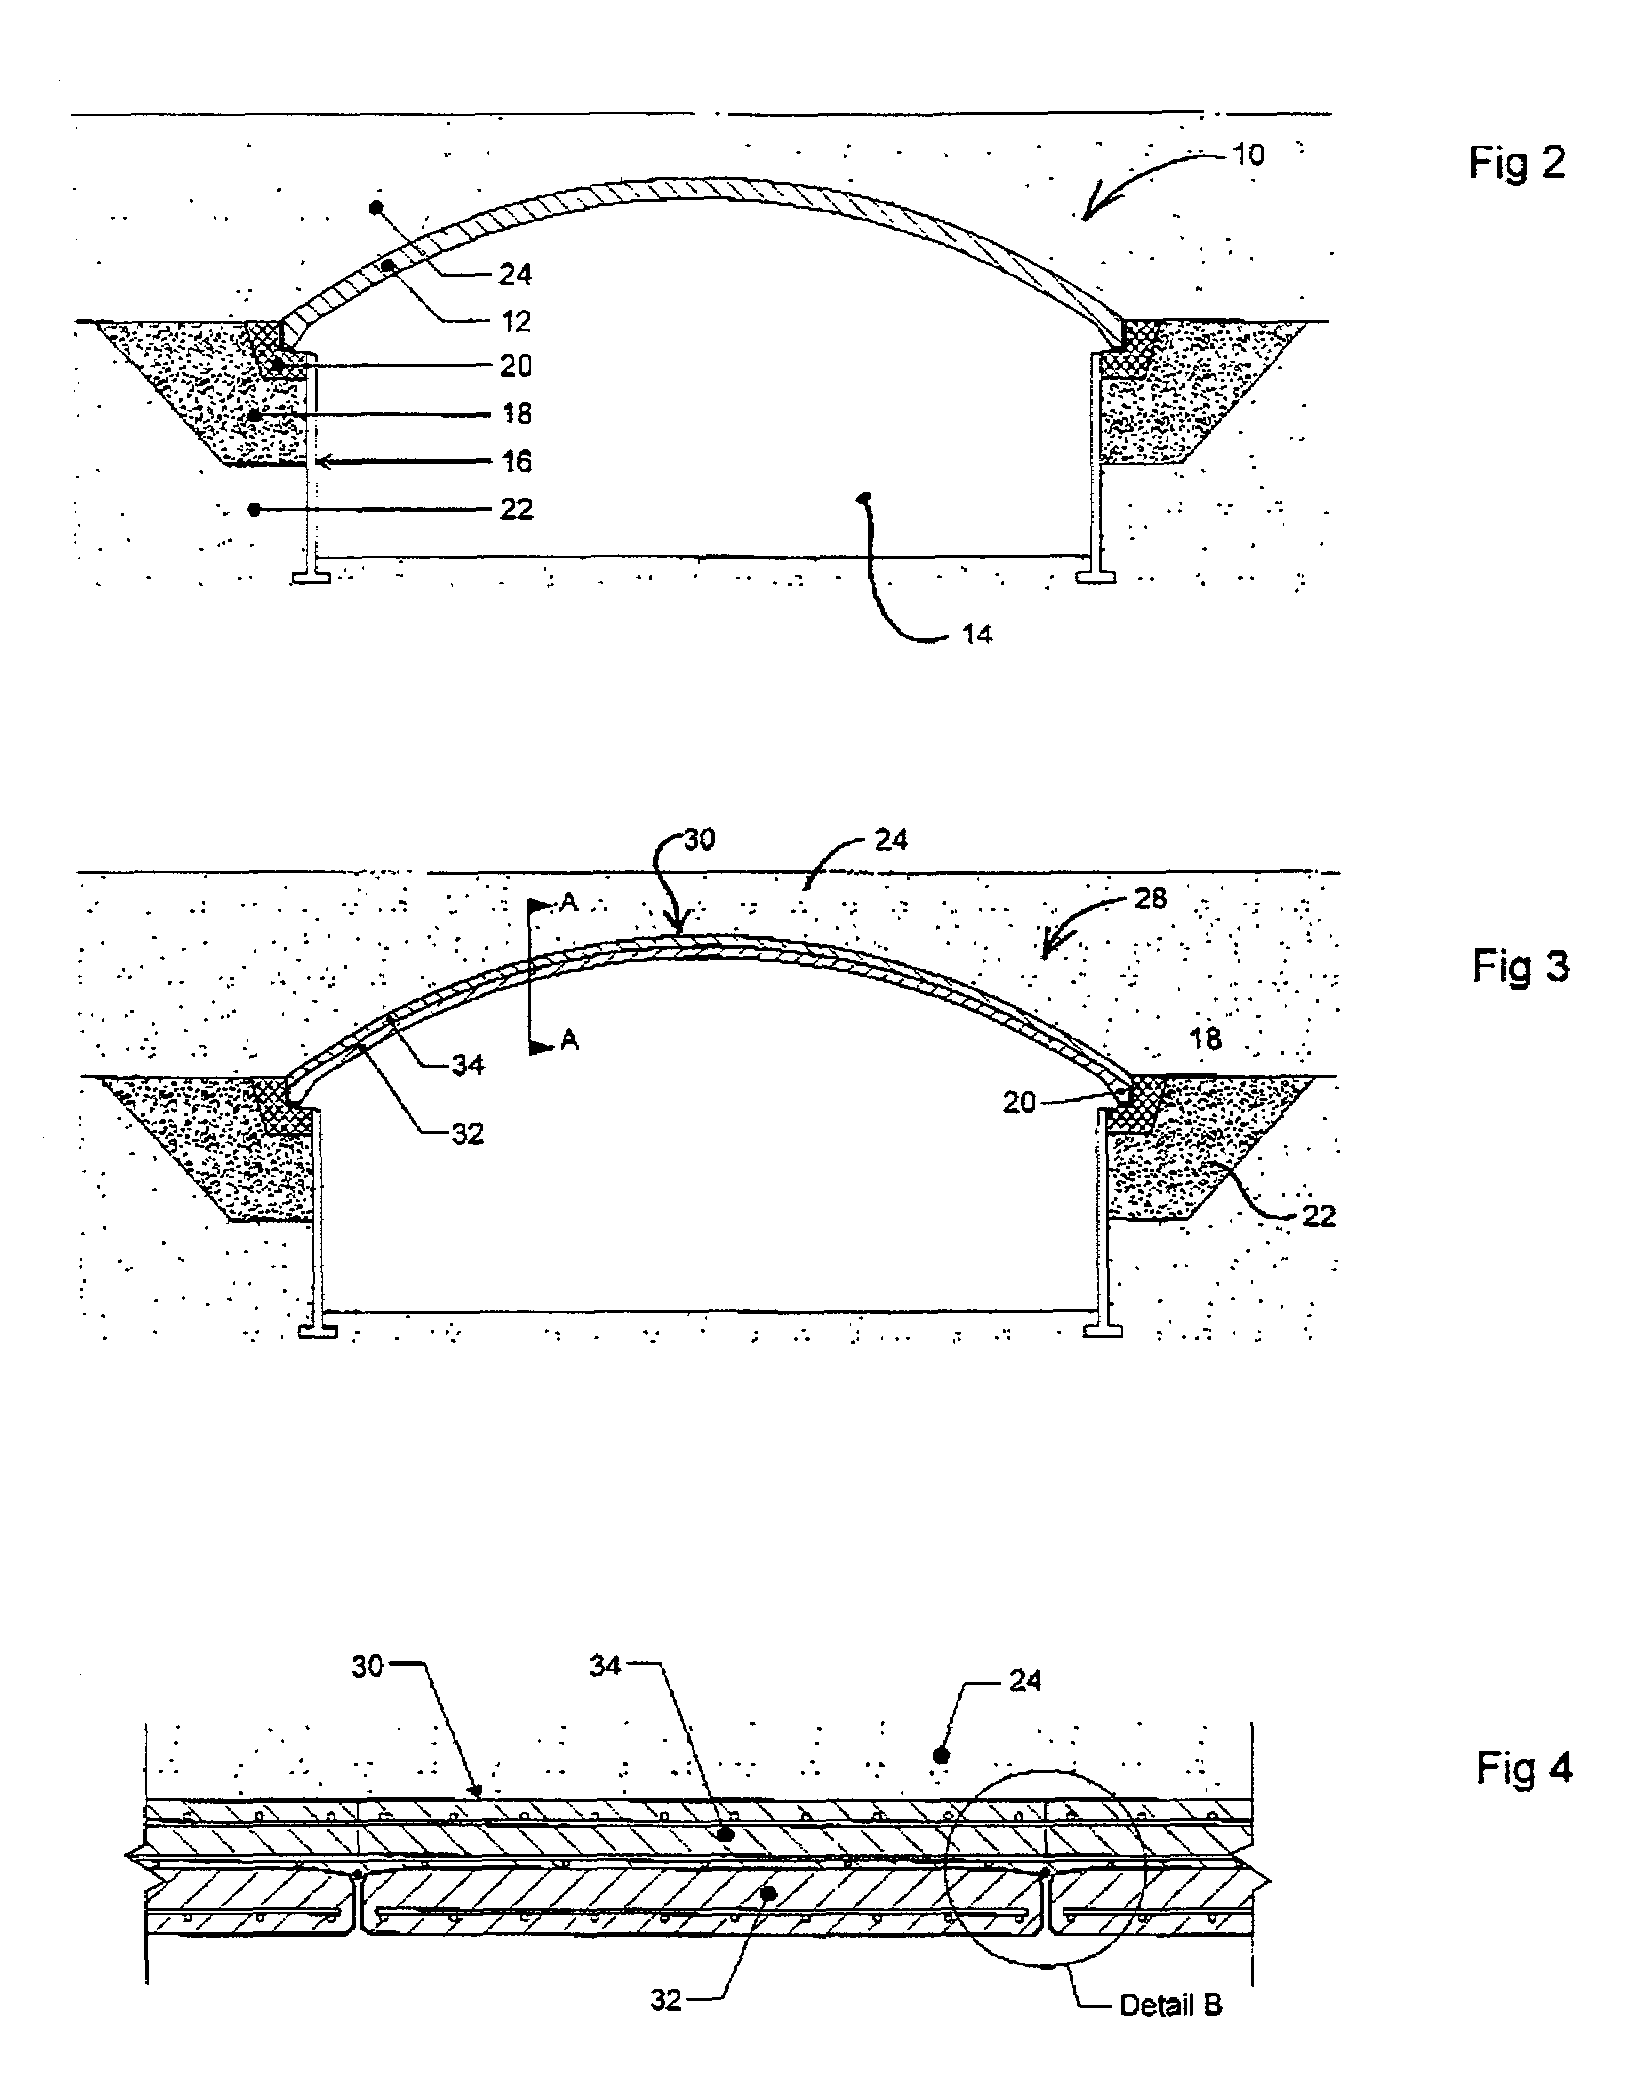 Composite overfilled arch system